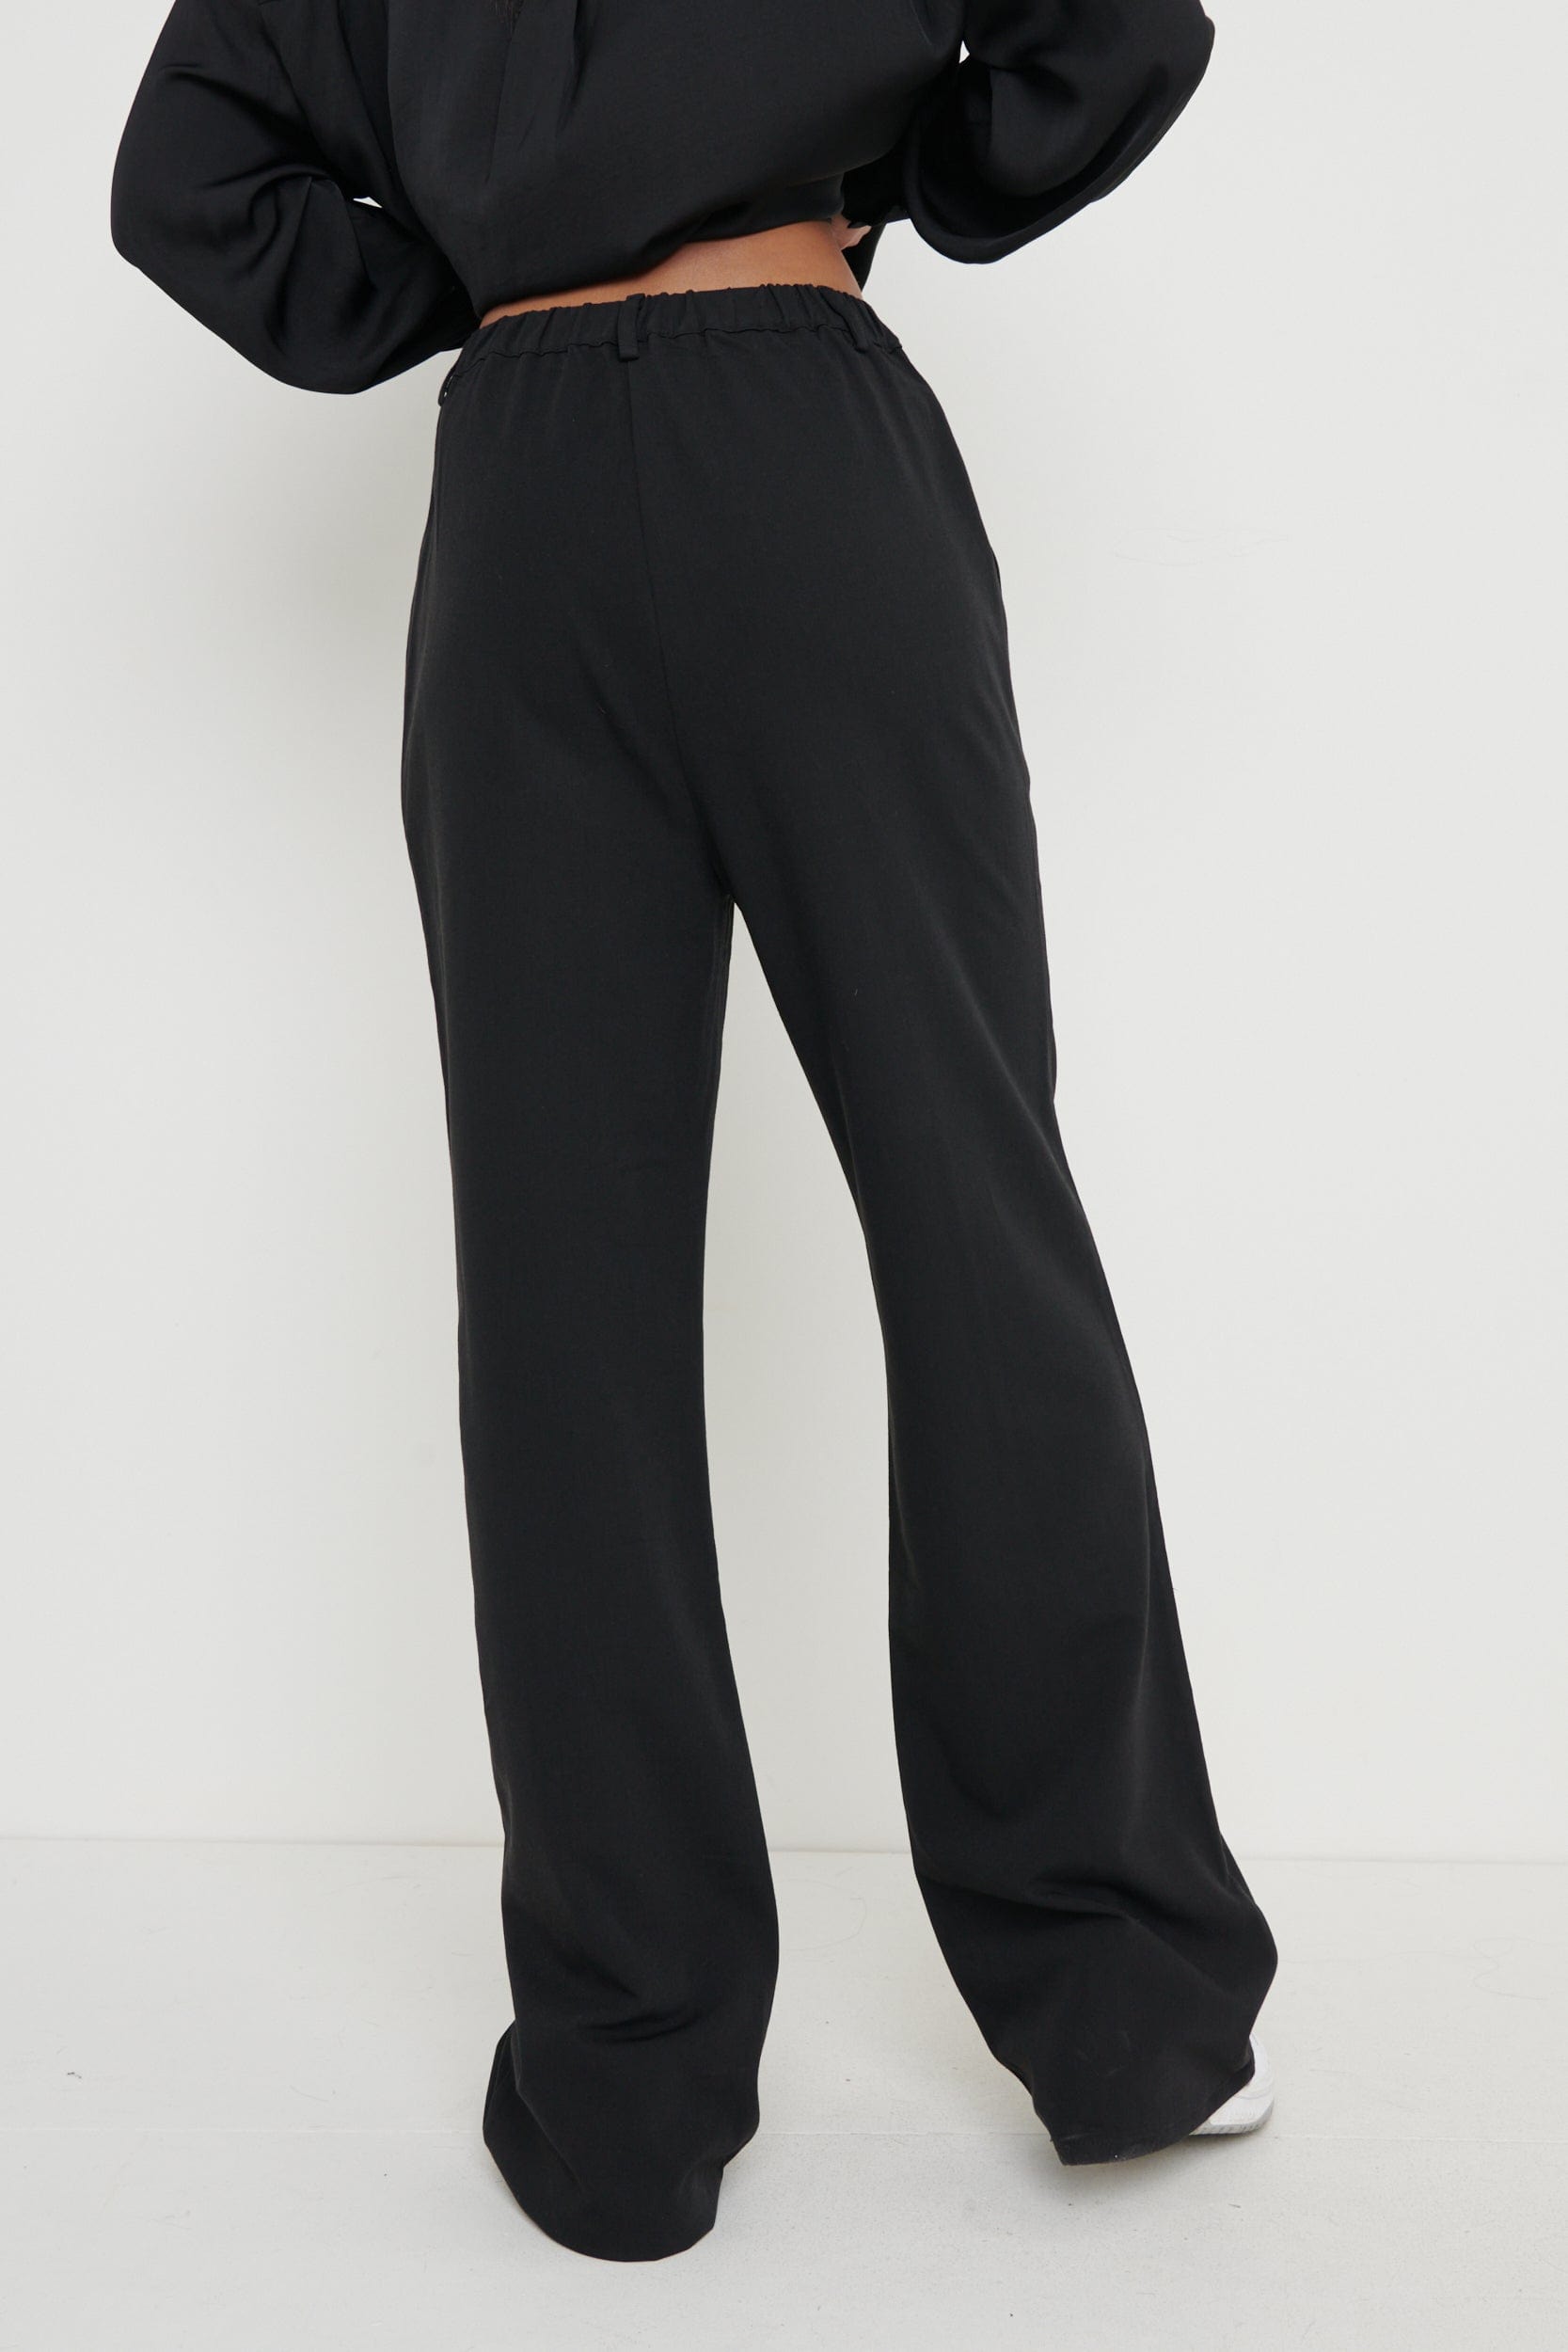 Tamsyn Super High Waisted Trousers - Black